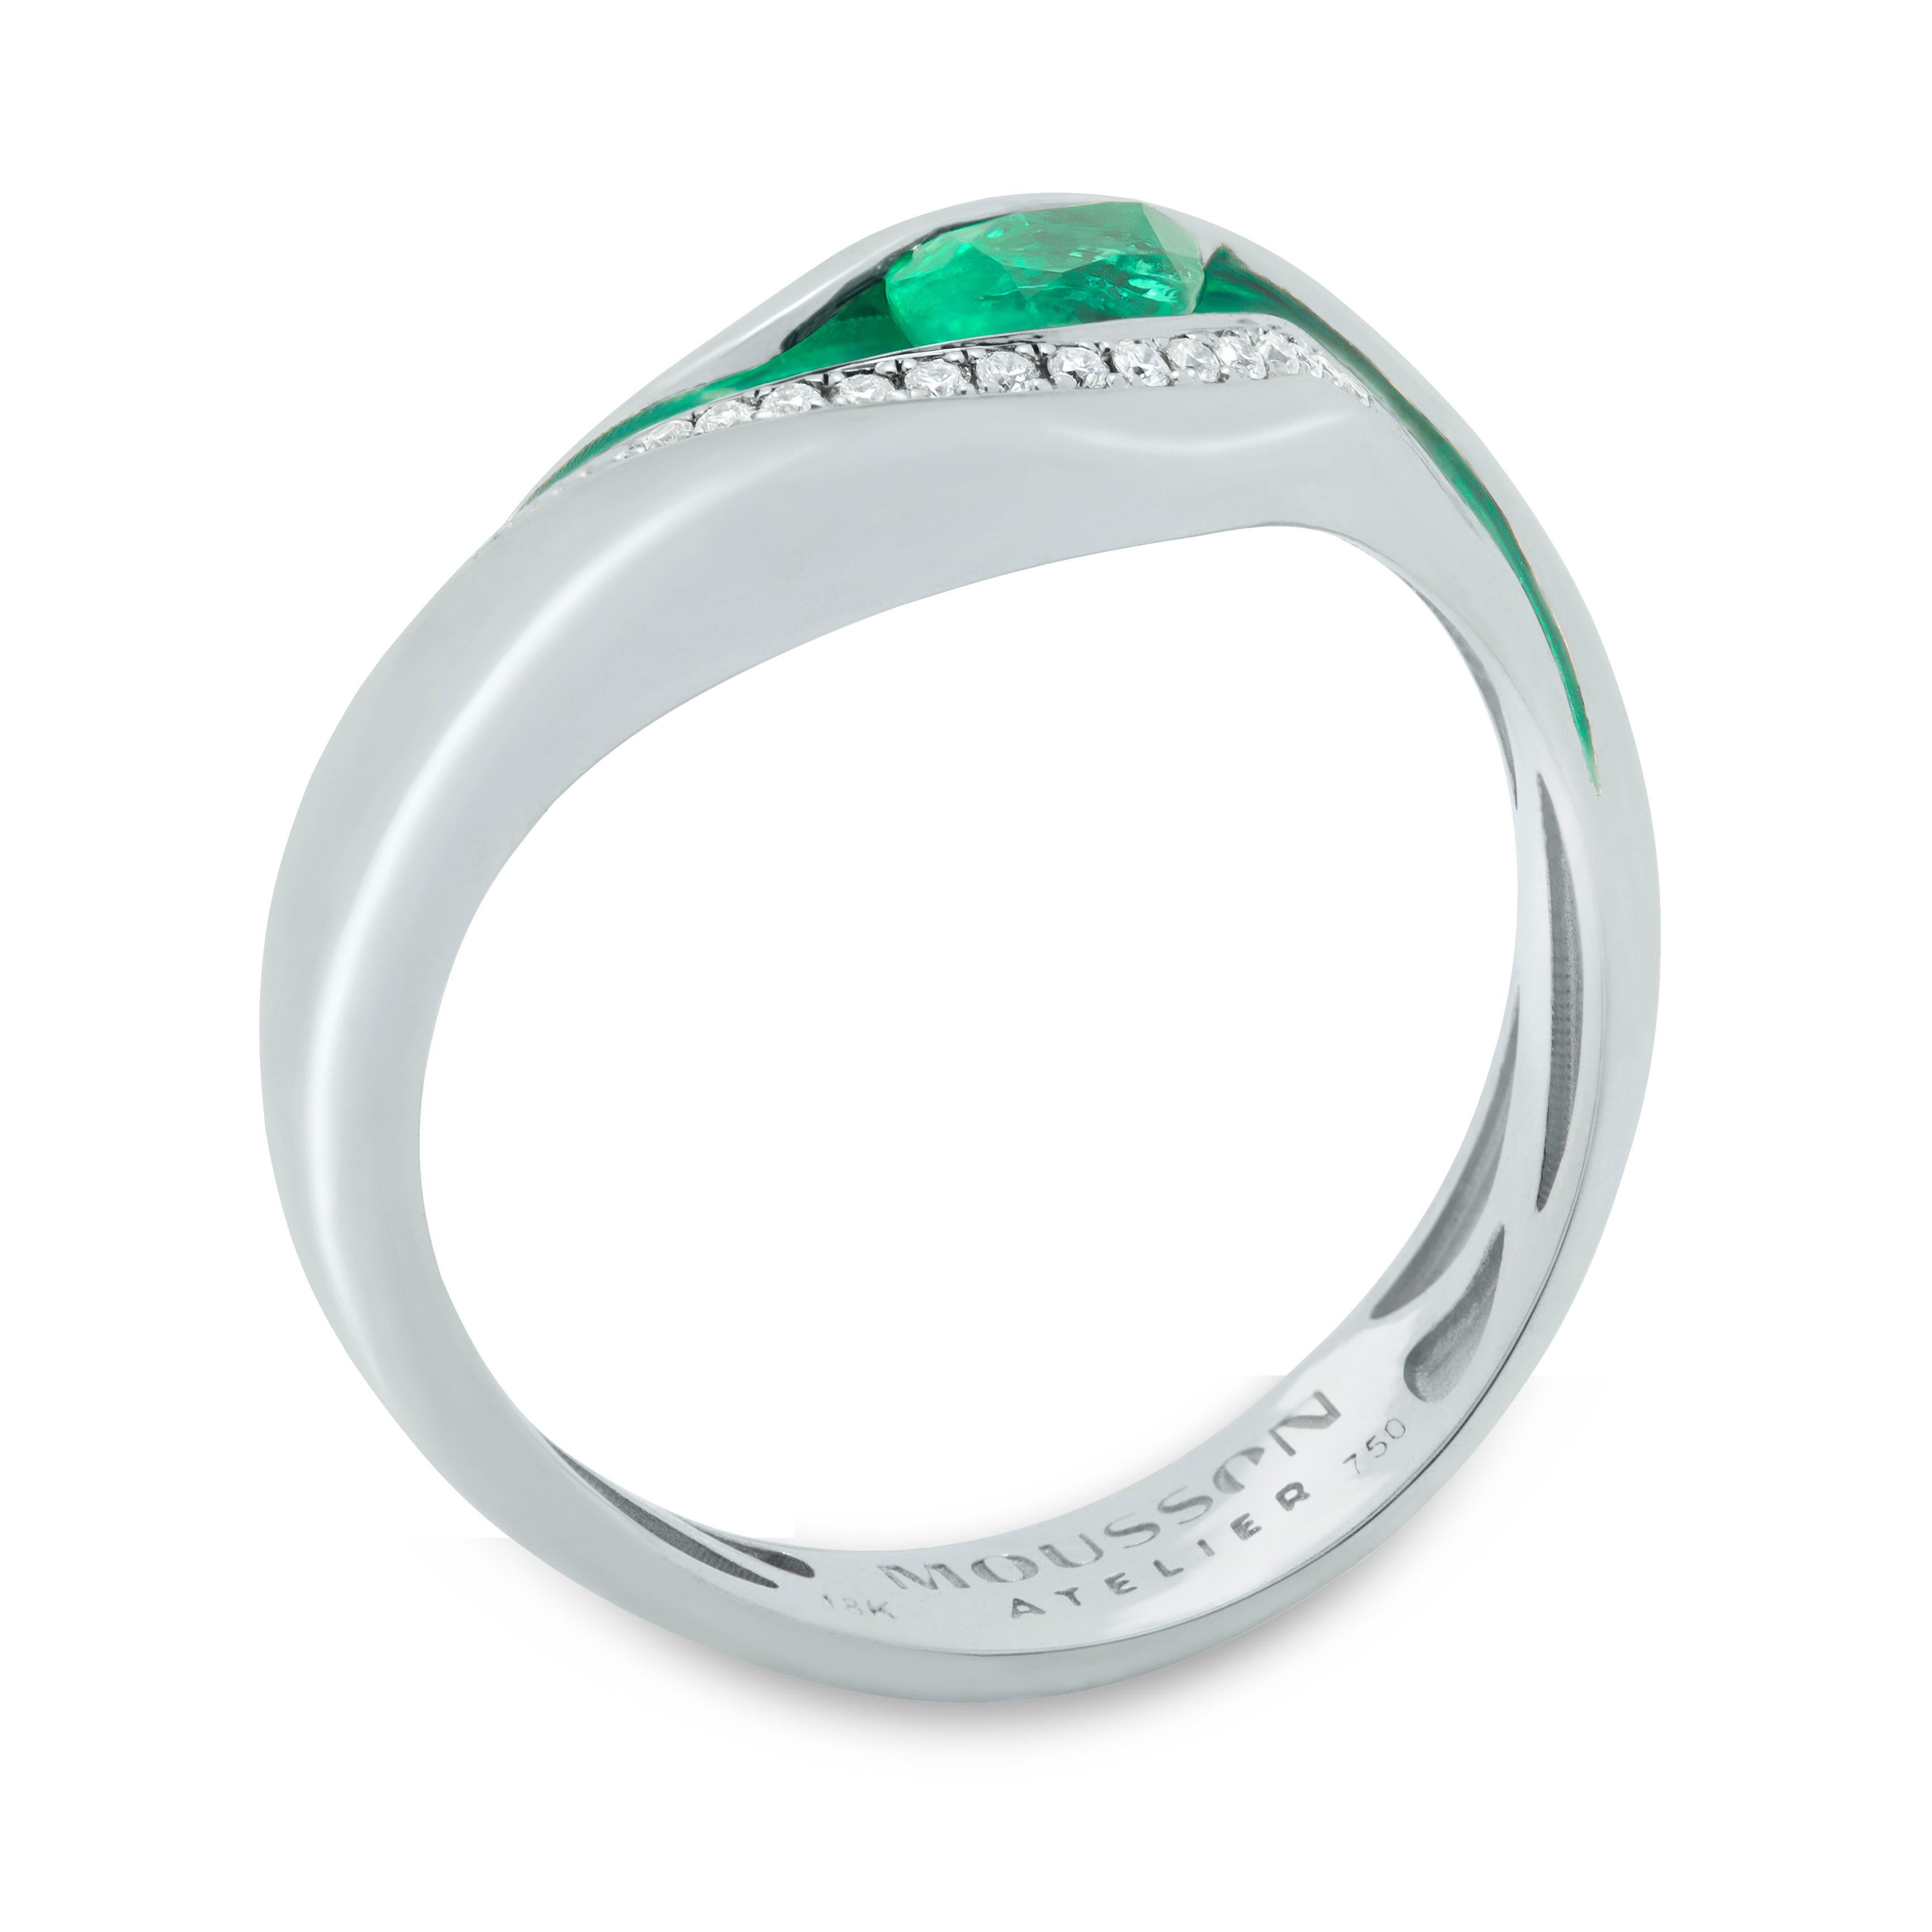 Emerald Diamonds Enamel 18 Karat White Gold Melted Colors Ring
Another Ring from our Melted Colors collection. As we can see, enamel is matched perfectly by our designers to the color of the central stones in order to create the effect of melting or